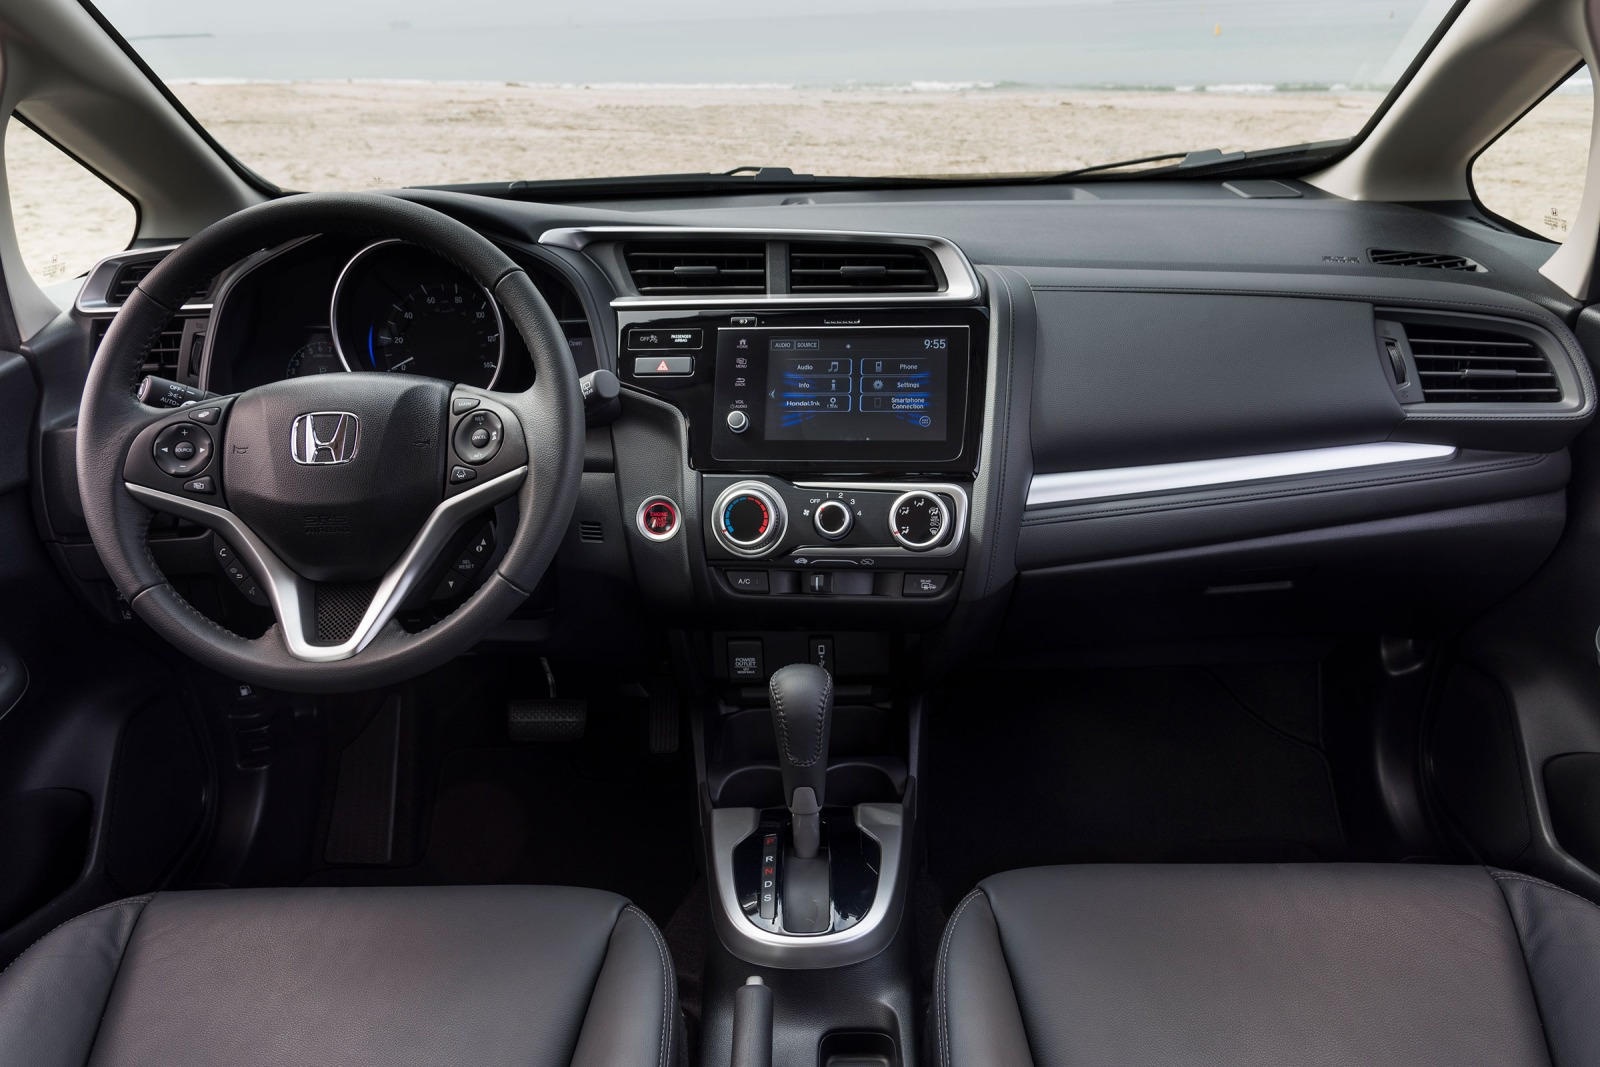 2020 Honda Fit Interior Dimensions: Seating, Cargo Space & Trunk Size -  Photos | CarBuzz